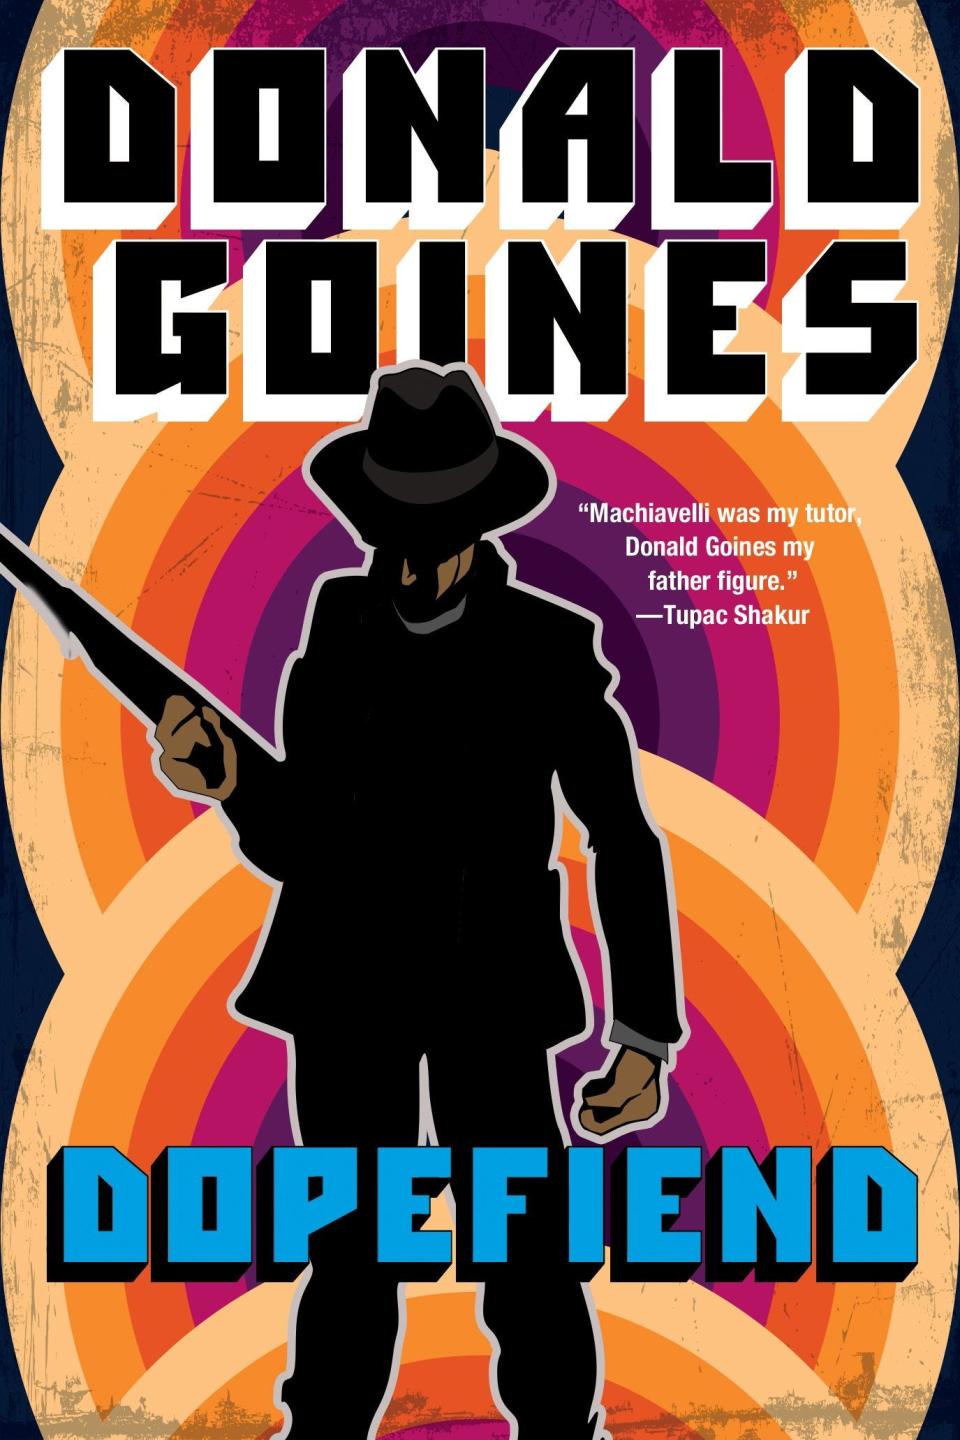 Donald Goines’ first published book, "Dopefiend,” was reissued this summer by Kensington Publishing Corp. It’s a grim tale of heroin addiction.